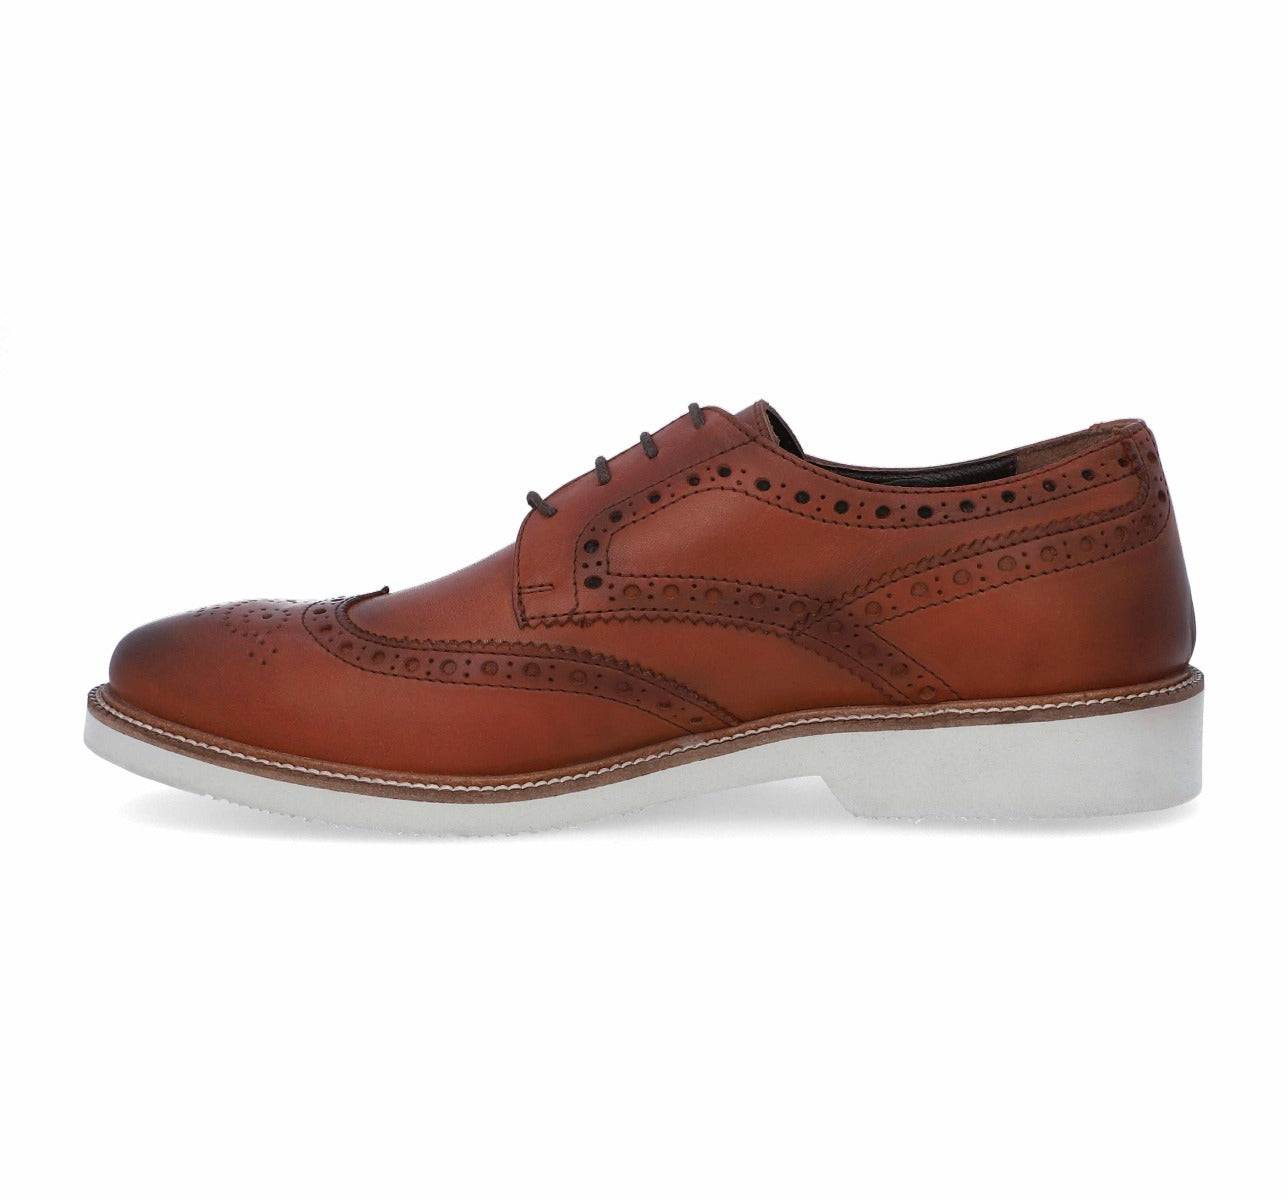 Barefoot Brown Formal Perforation with White Sole For Men 10788